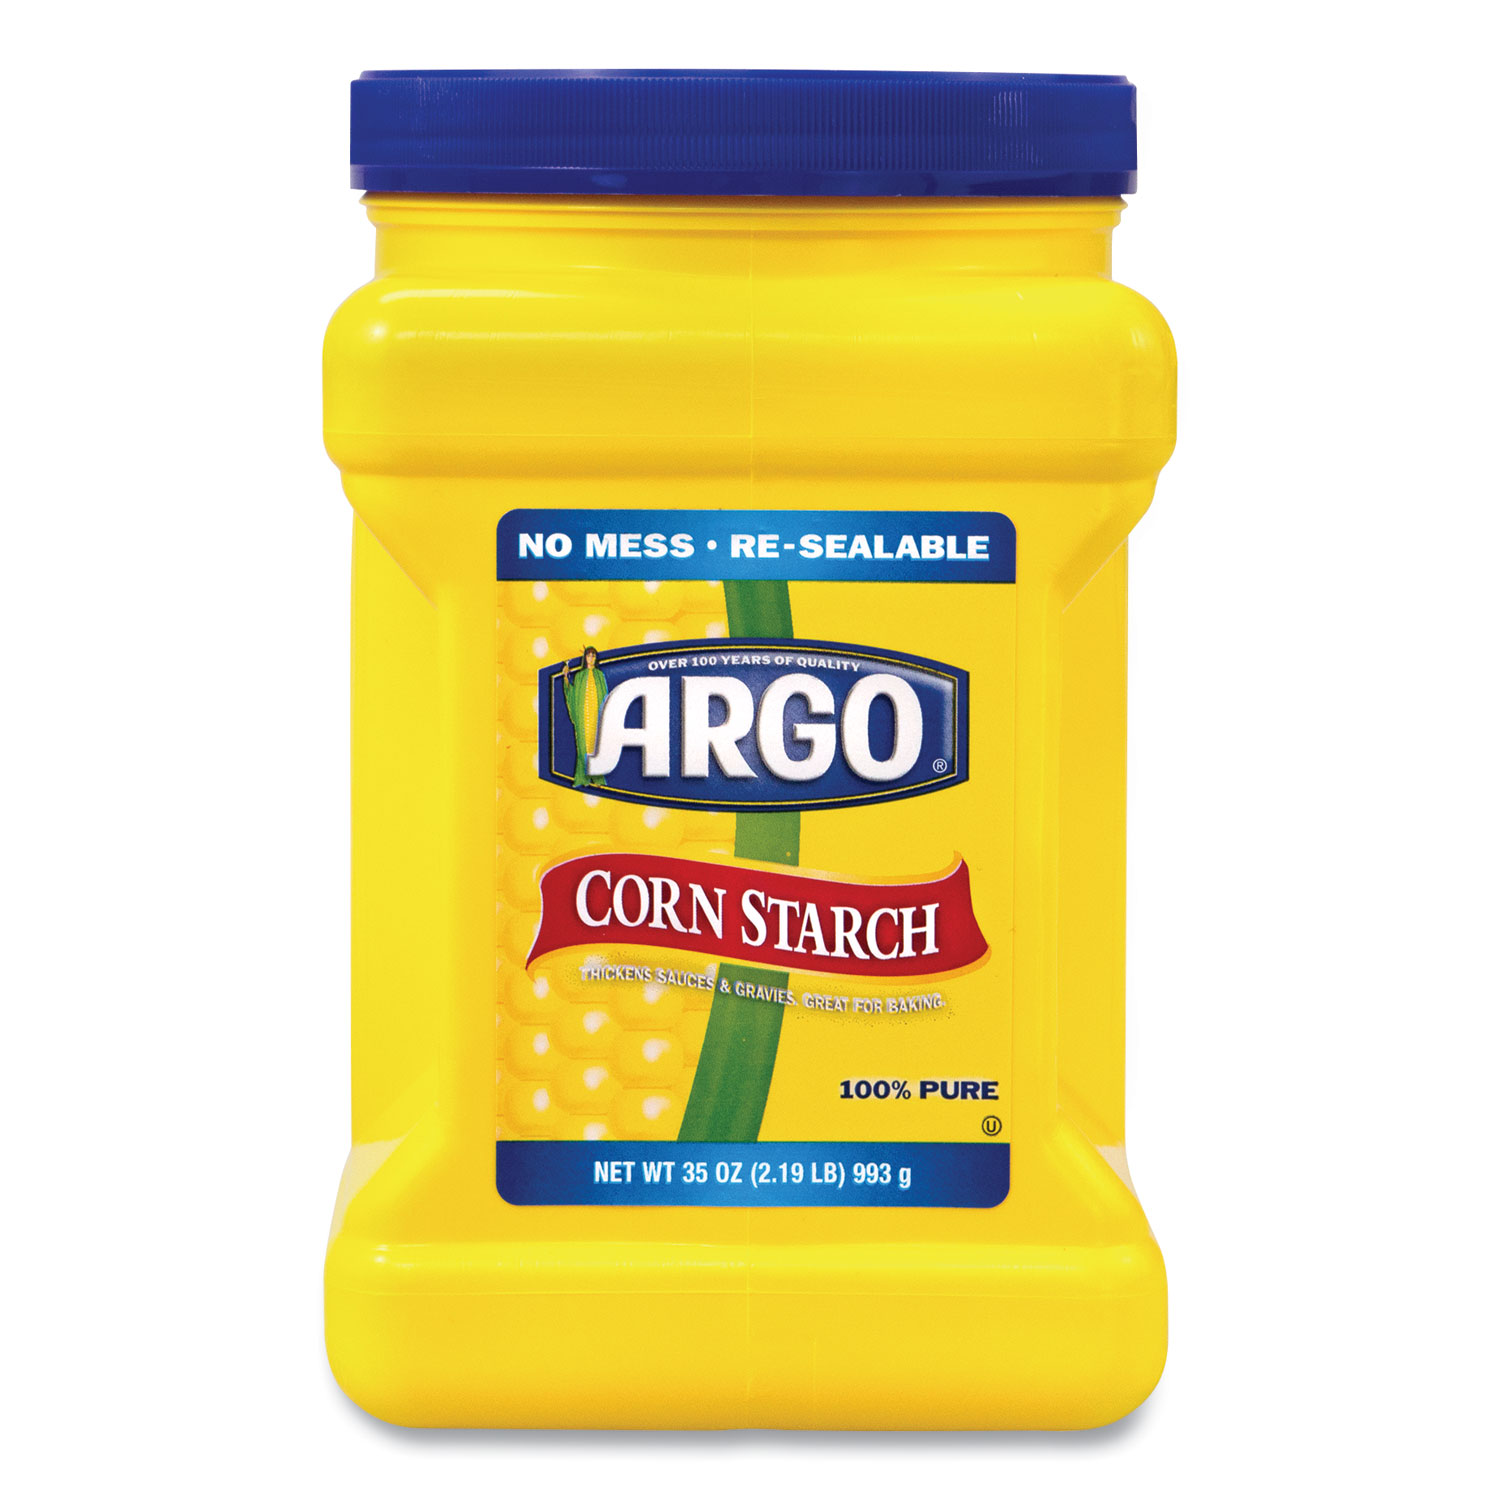  ARGO 0 Corn Starch, 35 oz Resealable Tub, Free Delivery in 1-4 Business Days (GRR90000153) 